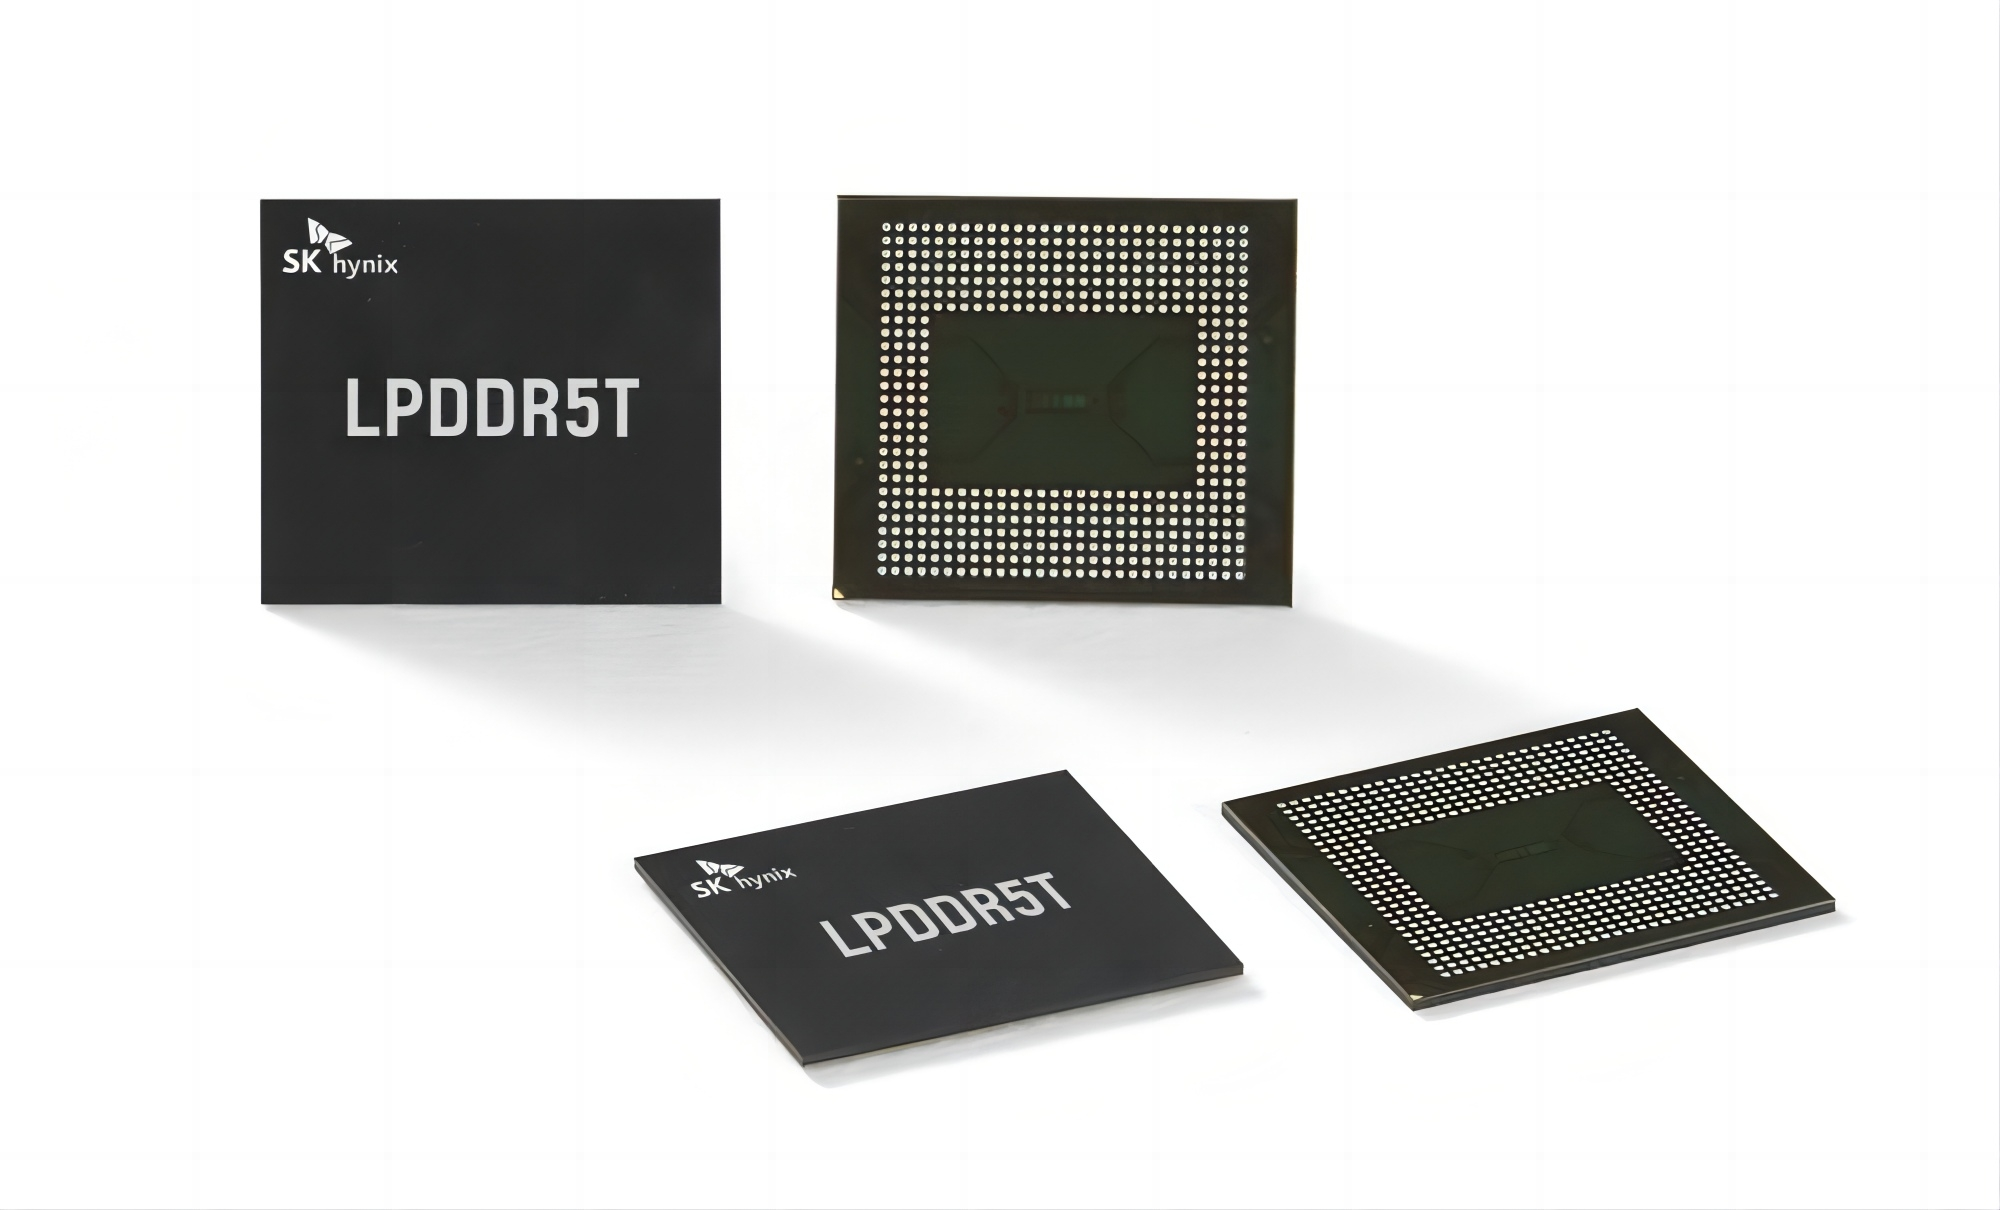 SK Hynix Launches LPDDR5T, the World's Fastest Mobile DRAM